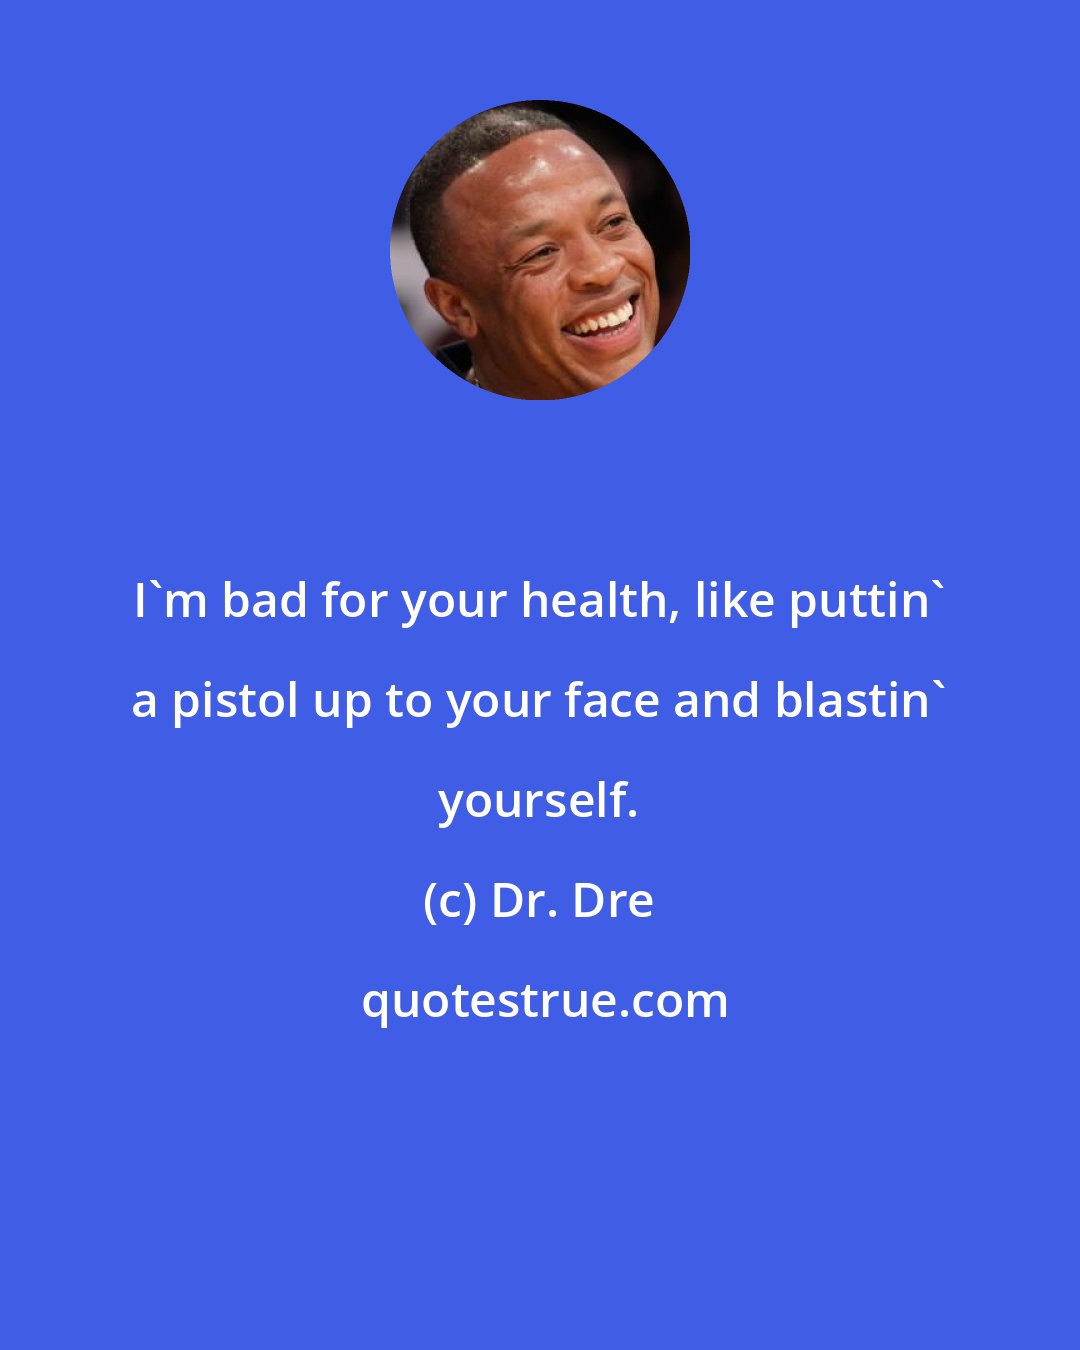 Dr. Dre: I'm bad for your health, like puttin' a pistol up to your face and blastin' yourself.